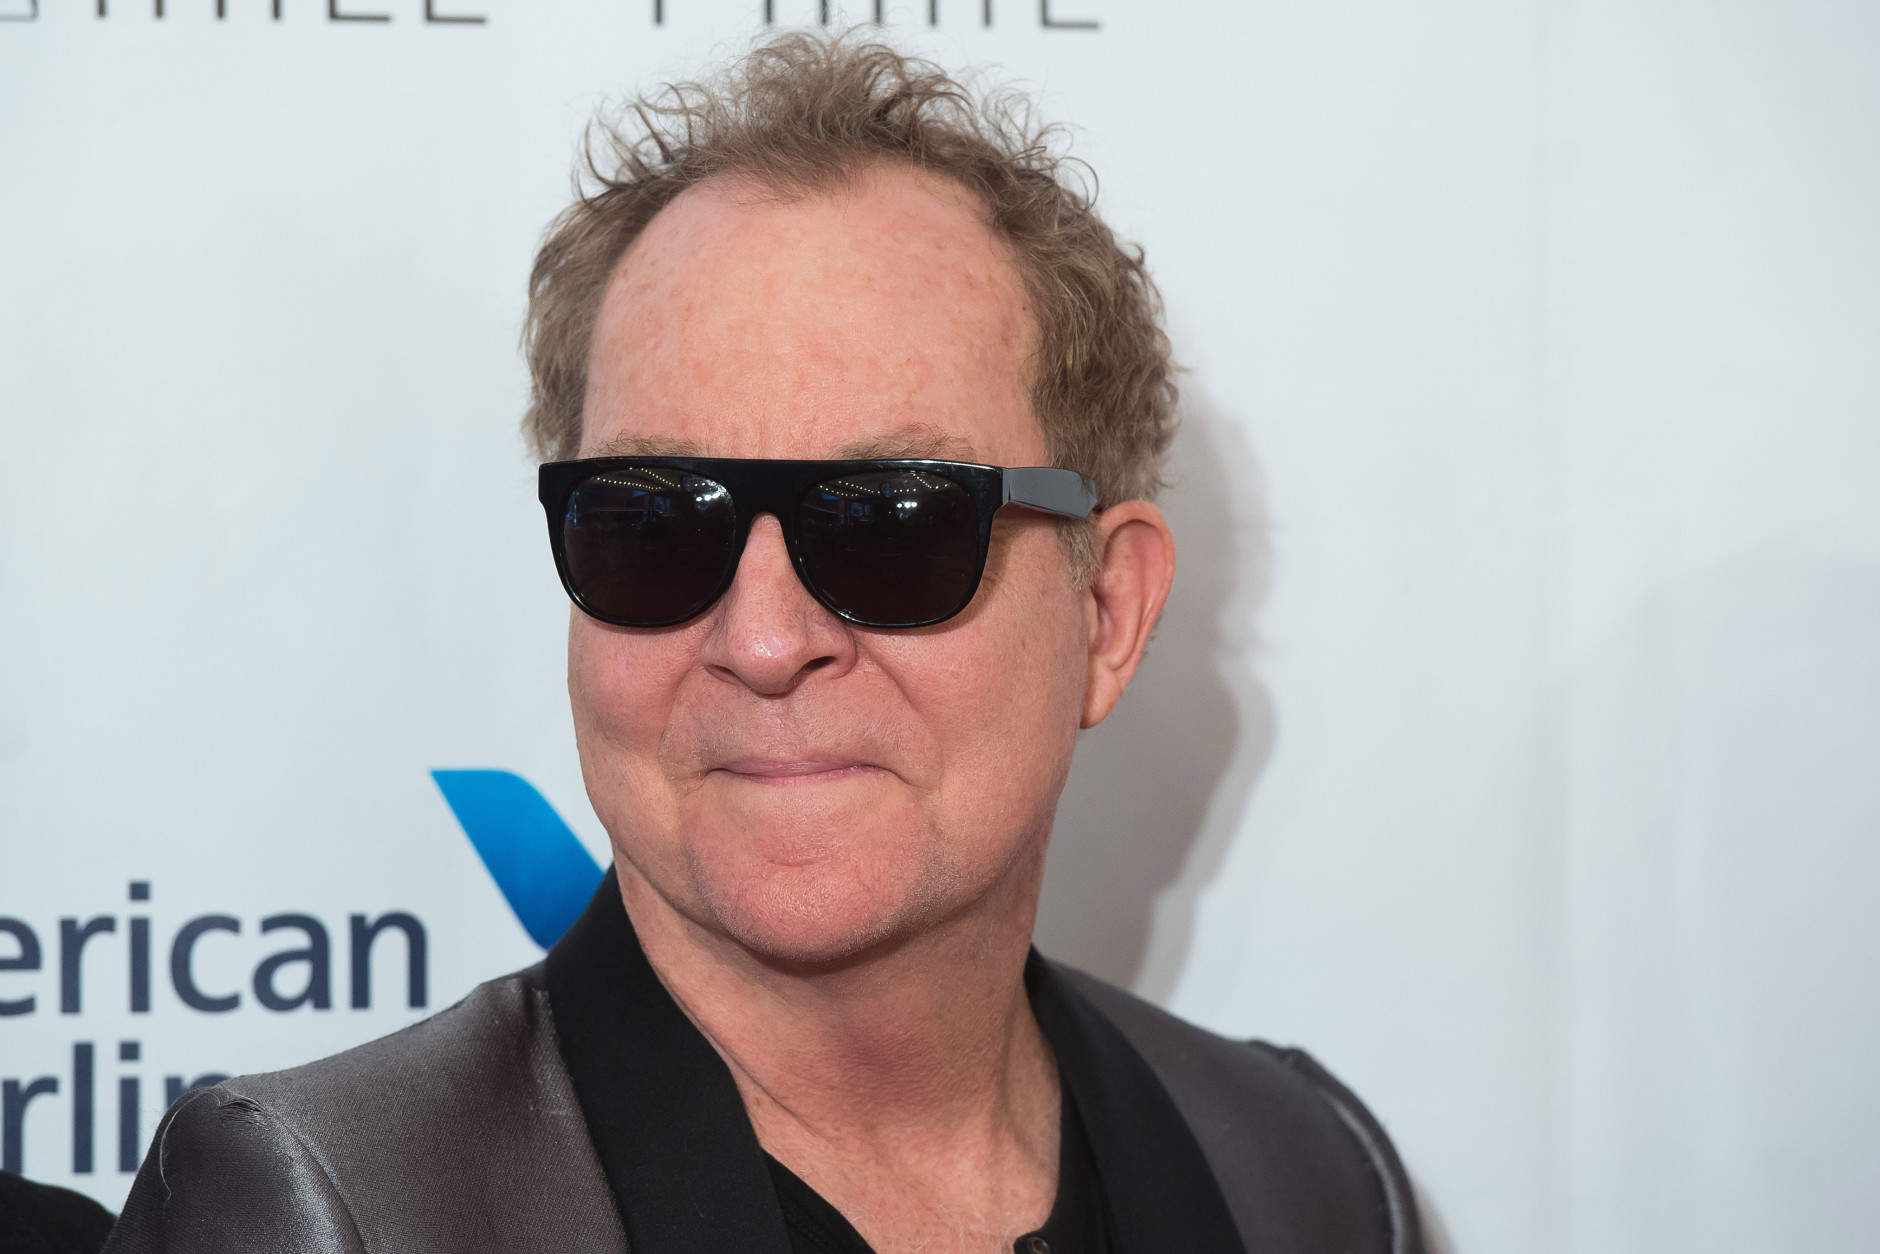 Fred Schneider attends the 47th Annual Songwriters Hall of Fame Induction Ceremony and Awards Gala at the Marriott Marquis Hotel on Thursday, June 9, 2016, in New York. (Photo by Charles Sykes/Invision/AP)